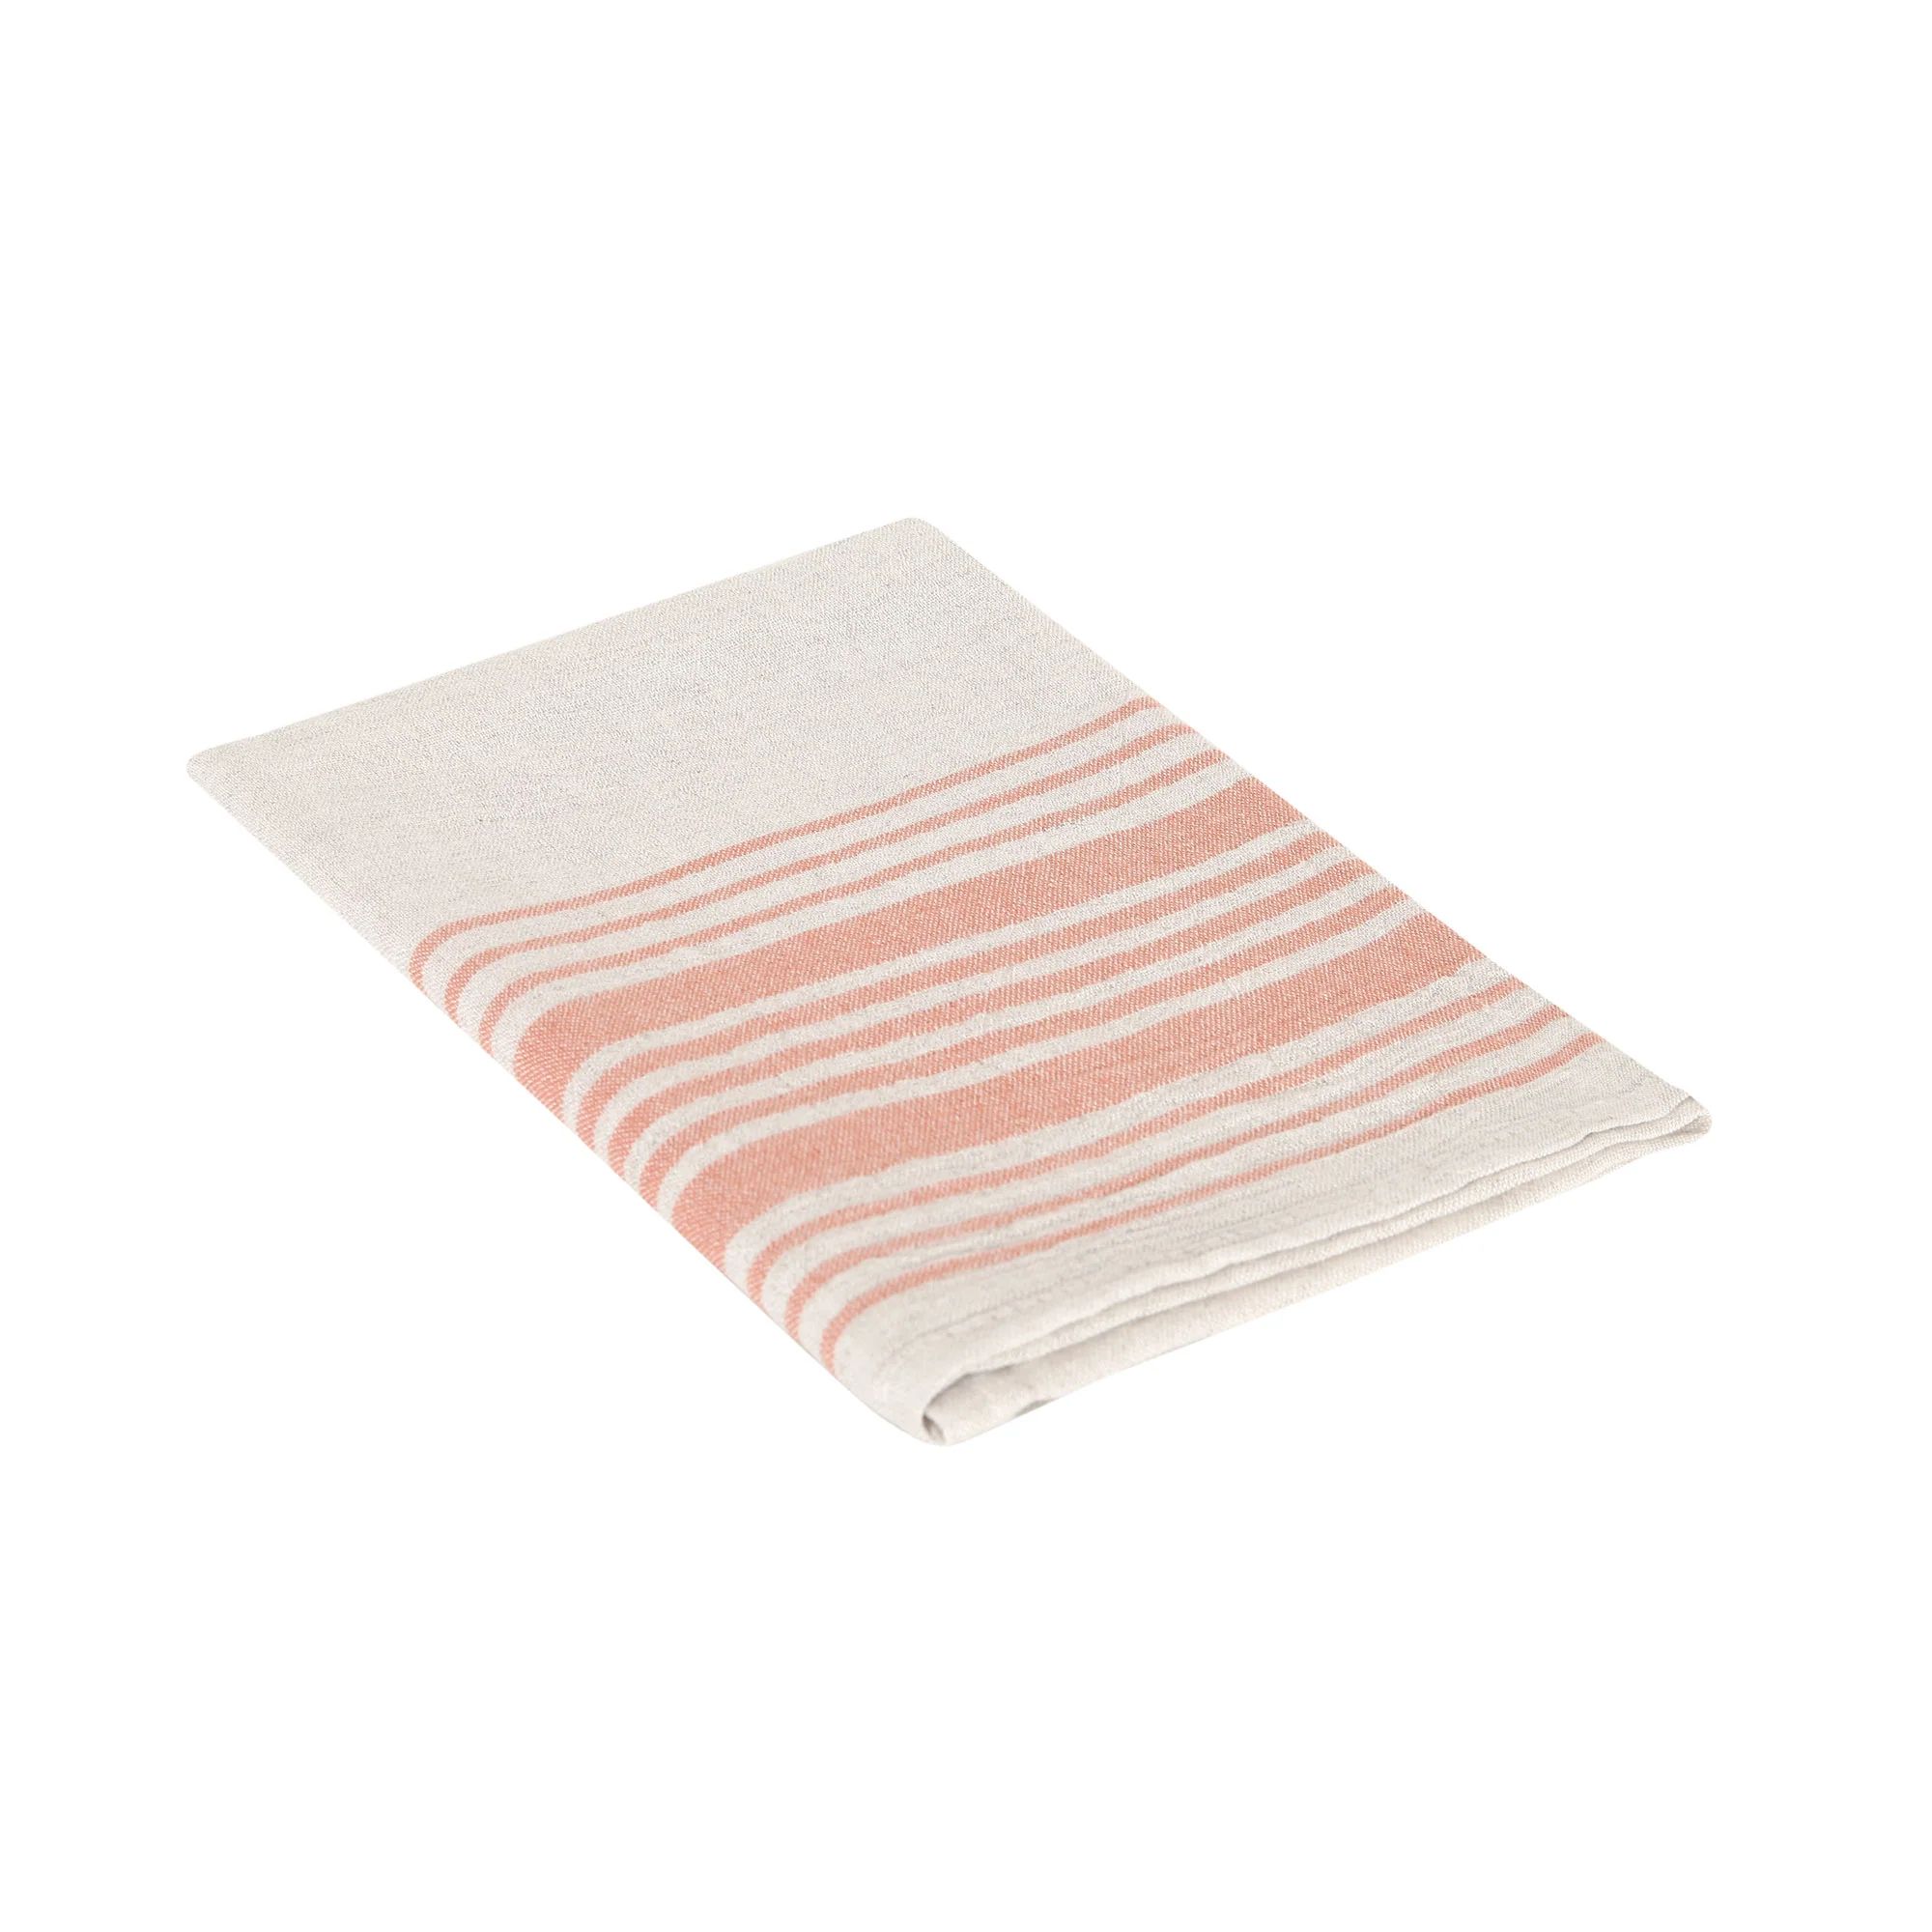 Rustic Sonoma Linen Kitchen Towel | Olive and Linen LLC